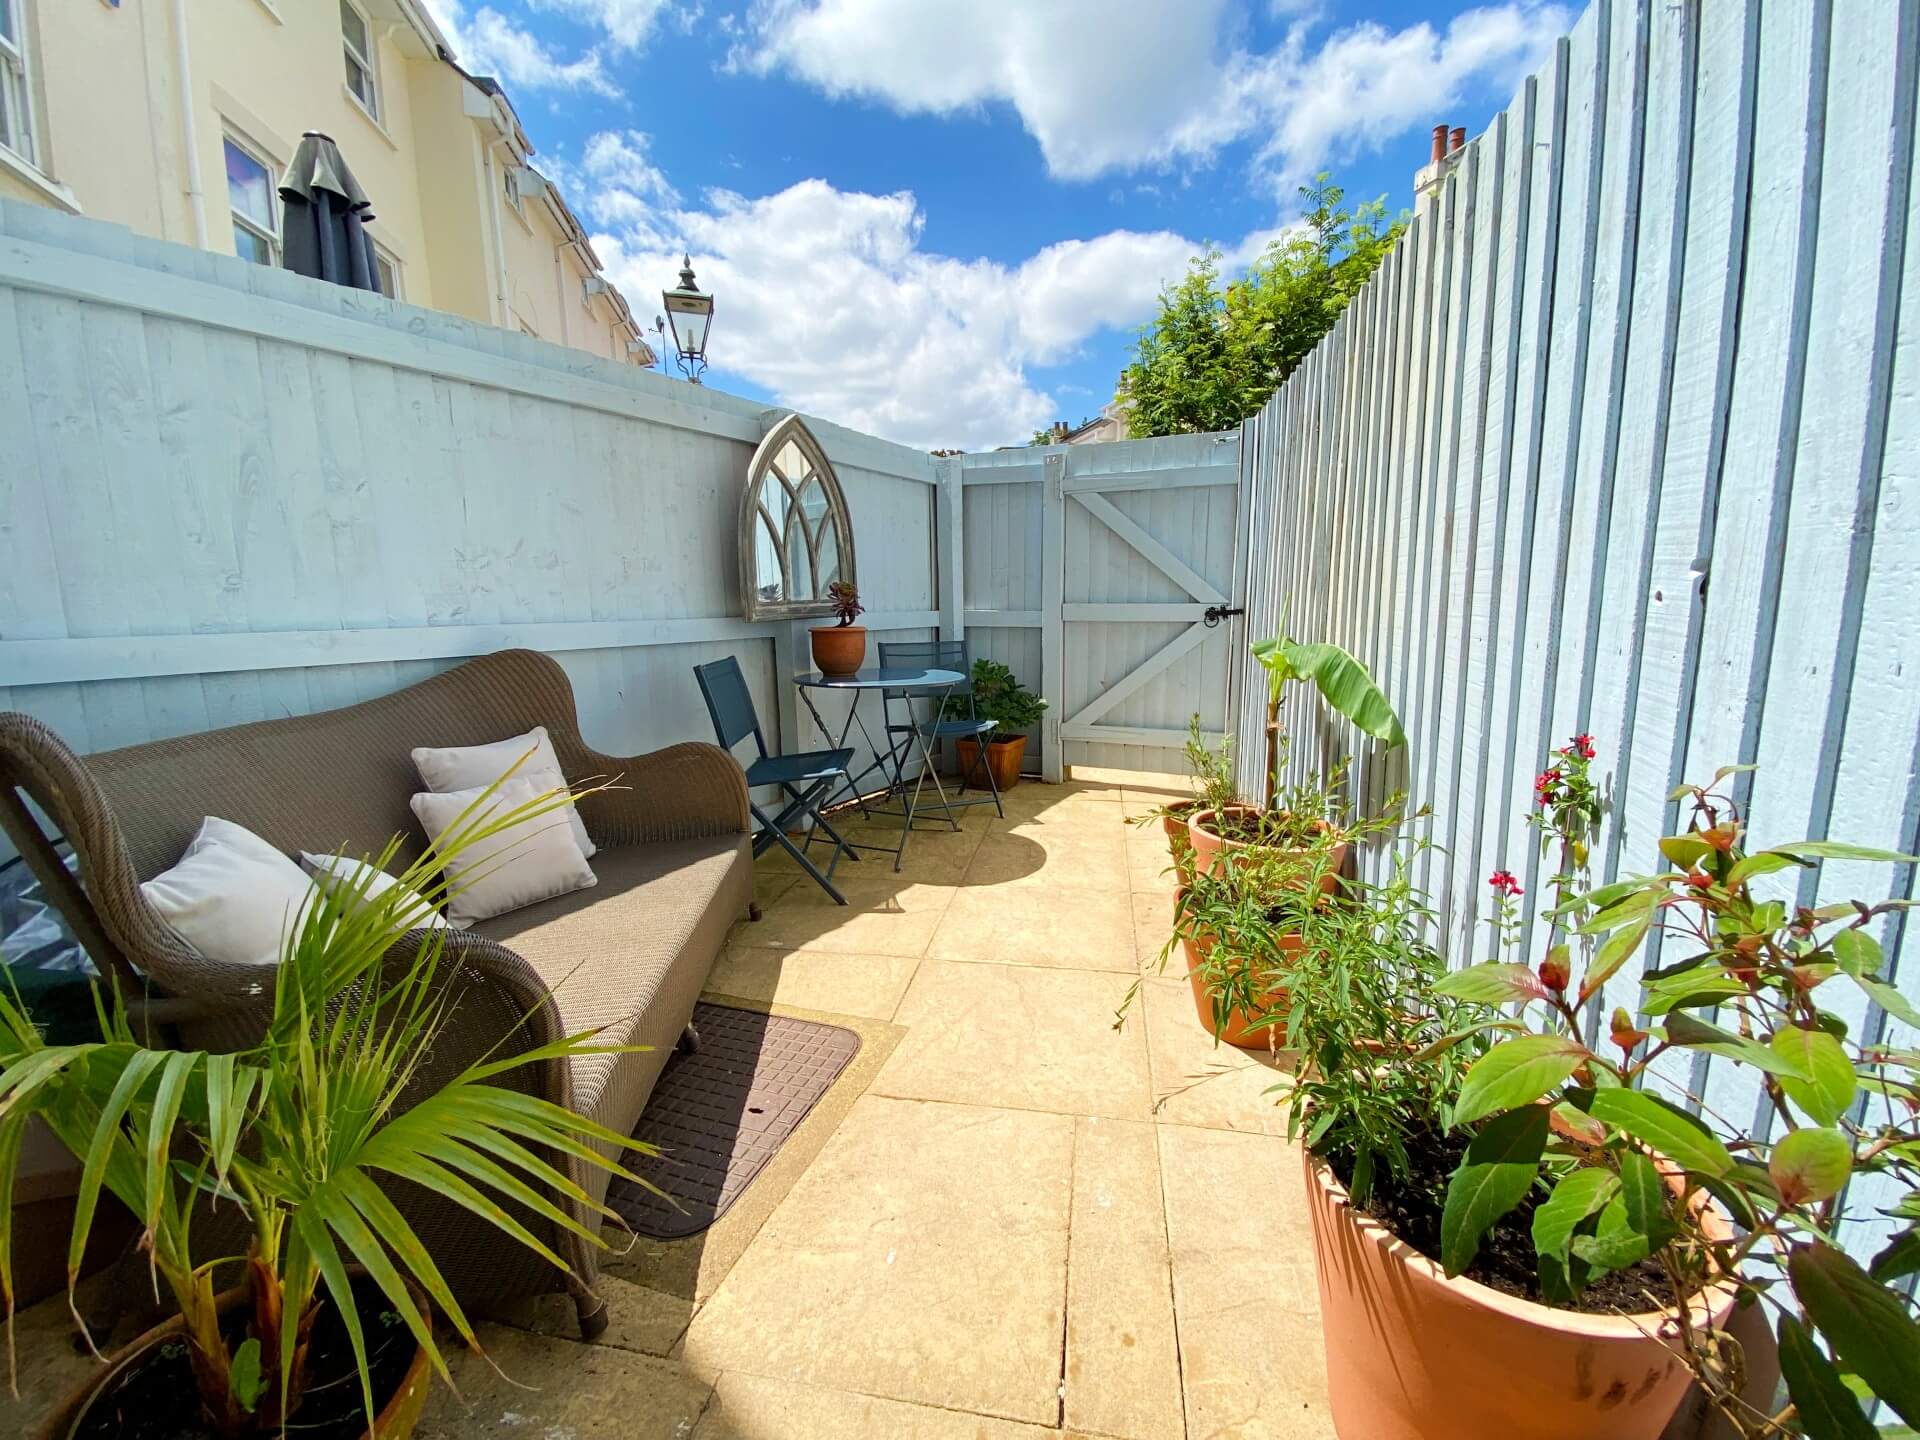 Lisburne Place Luxury Town House self catering accommodation - private courtyard.